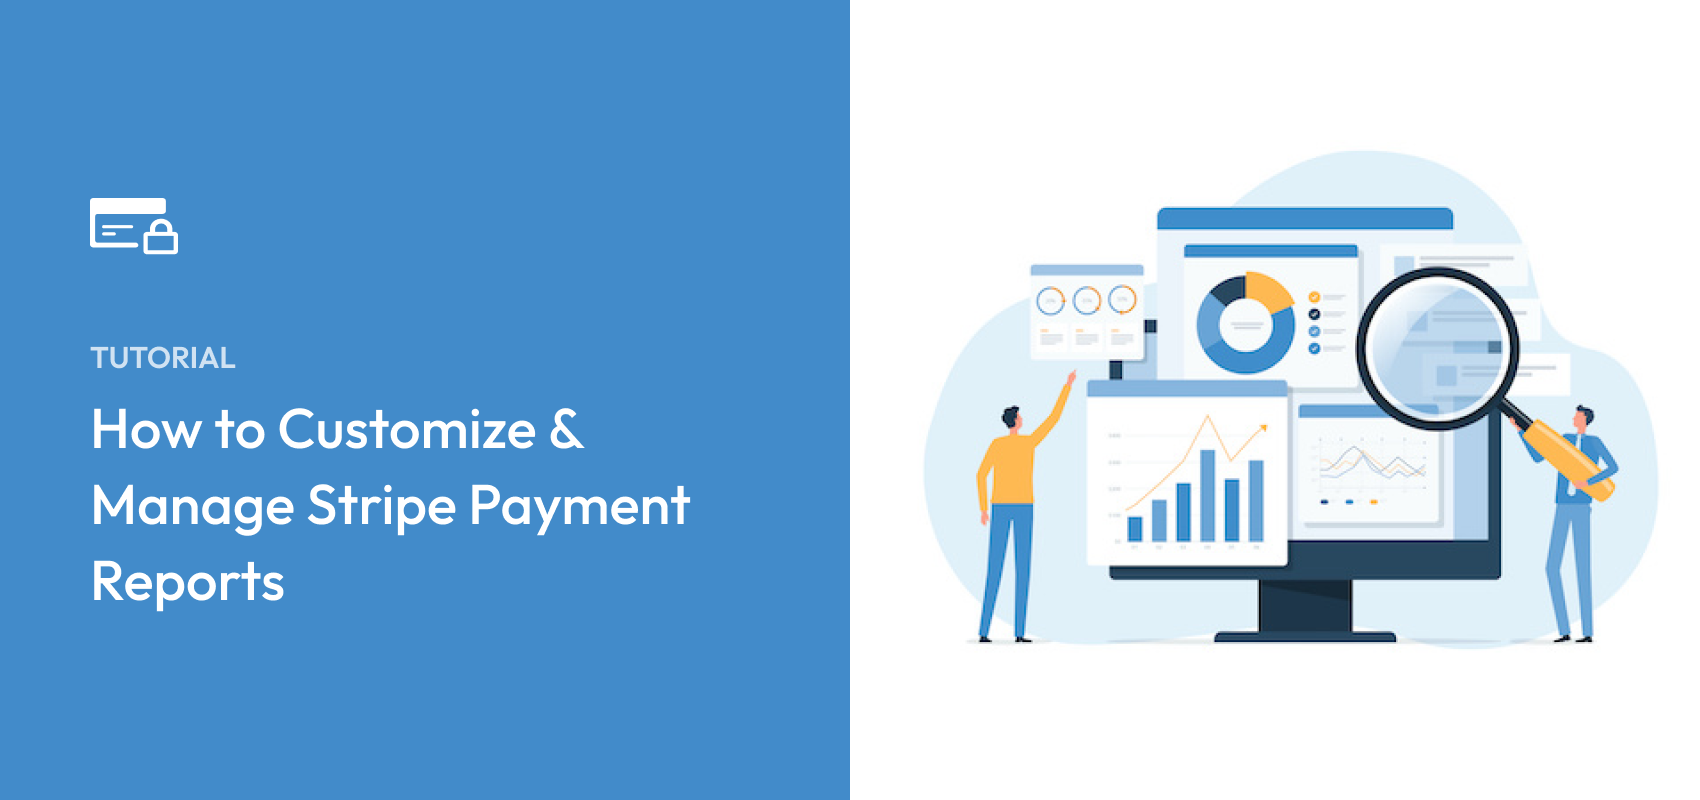 How to Customize & Manage Stripe Payment Reports